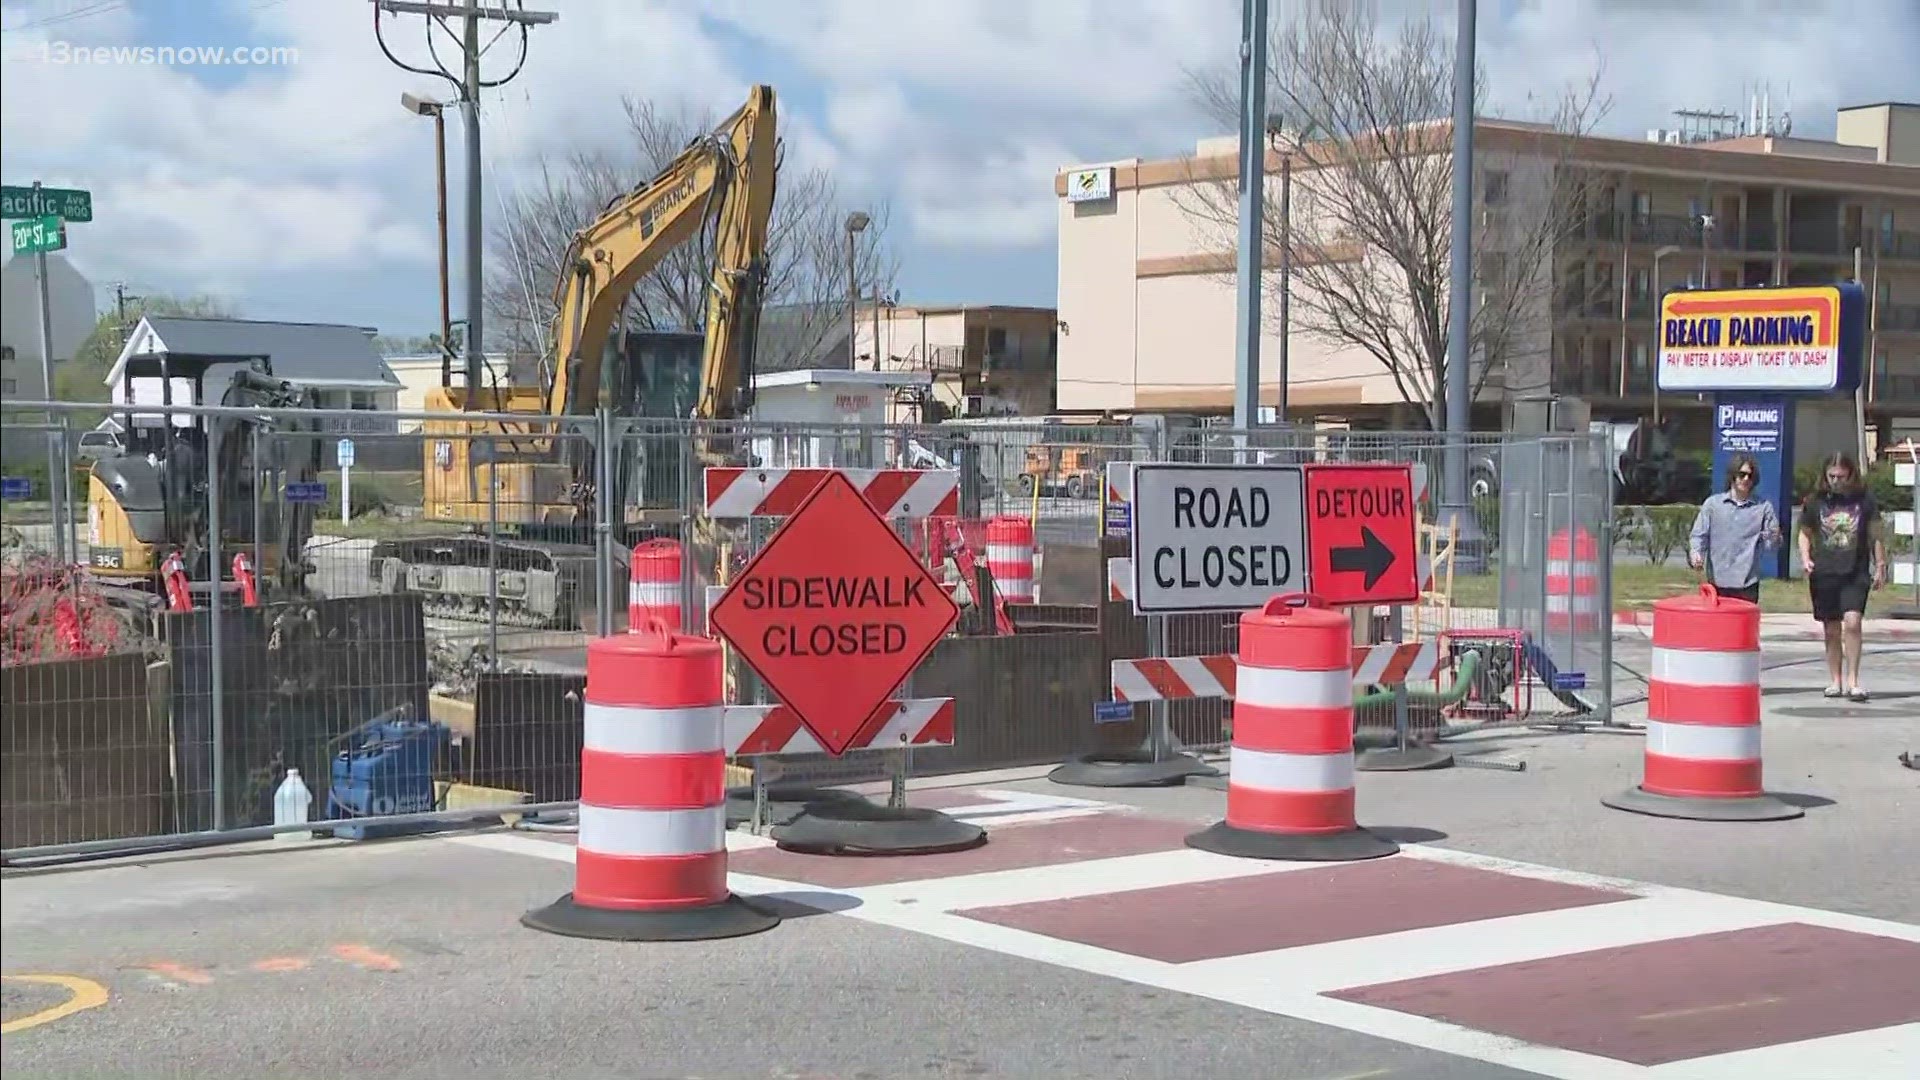 The Virginia Beach Department of Public Works has several projects in the works, which include infrastructure updates and prep for larger projects still under wraps.